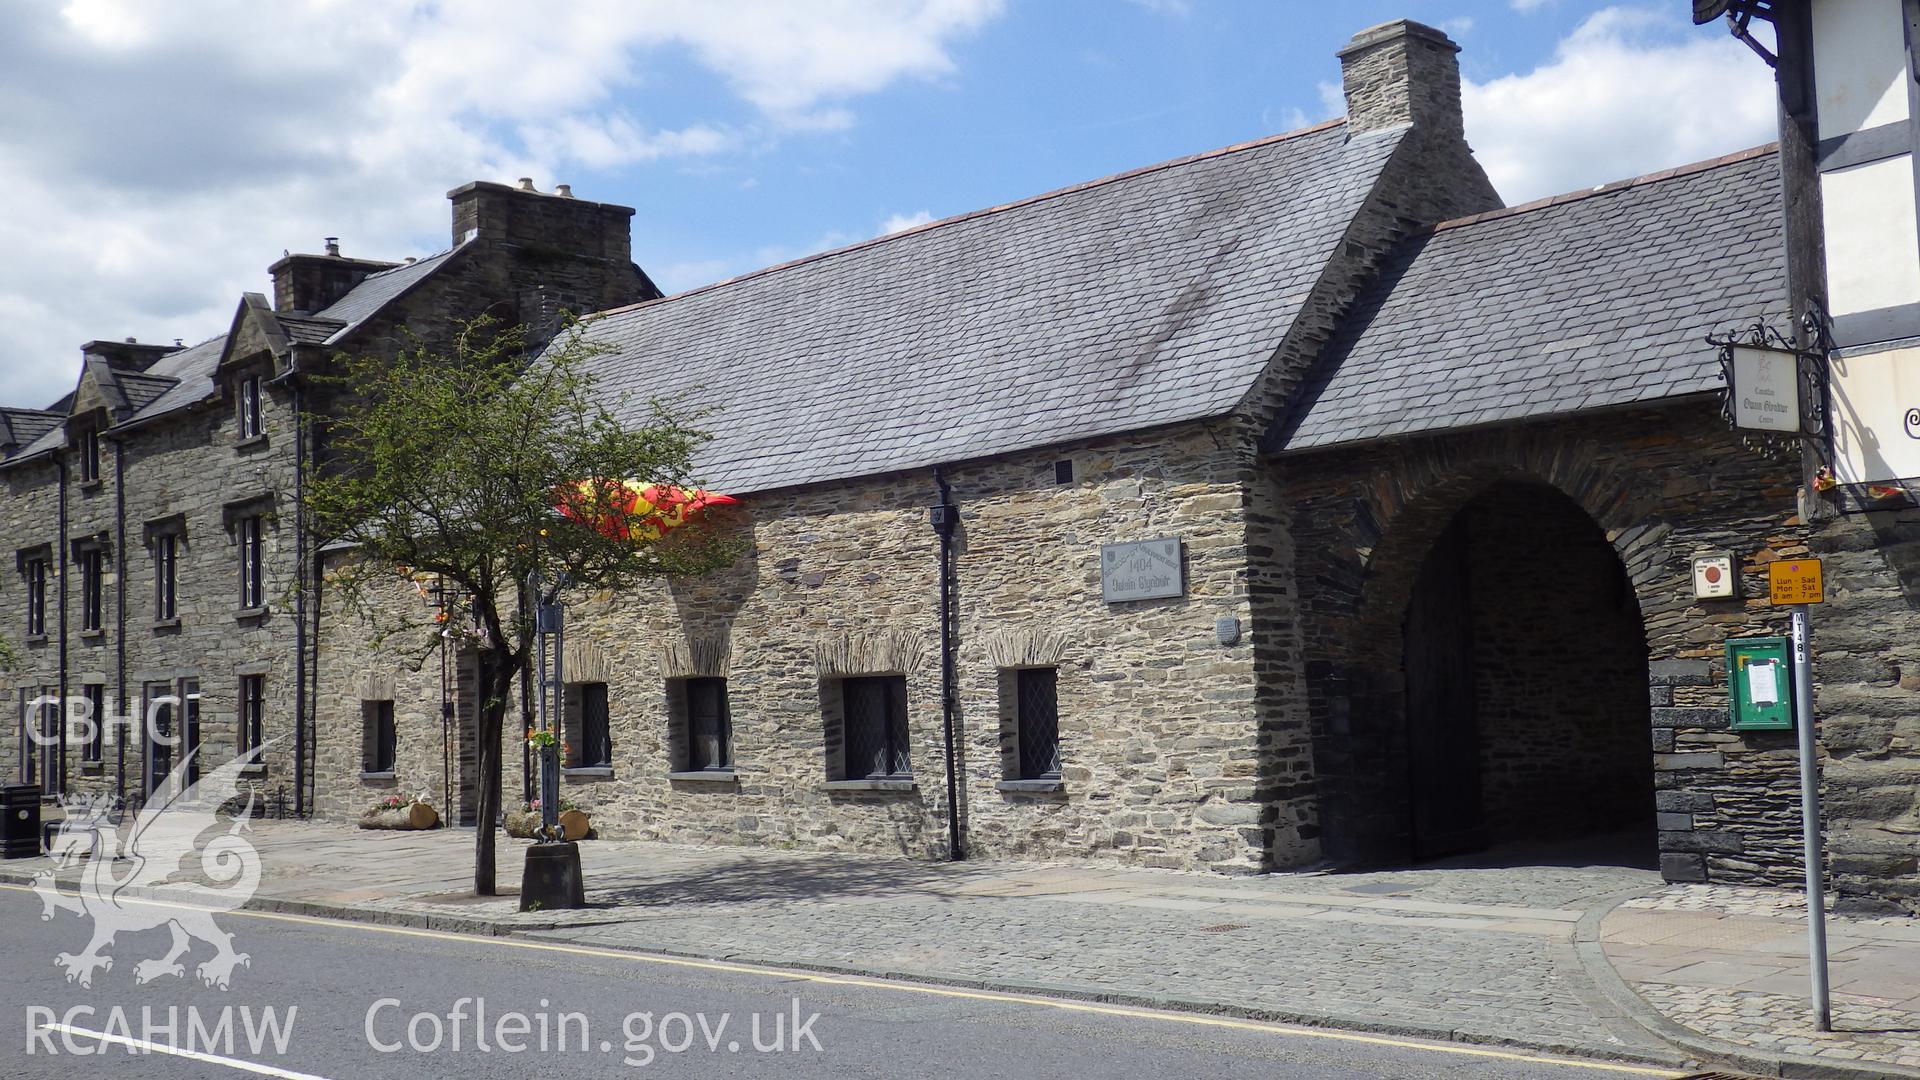 Exterior view of the Old Parliament Building, Heol Maengwym, Machynlleth